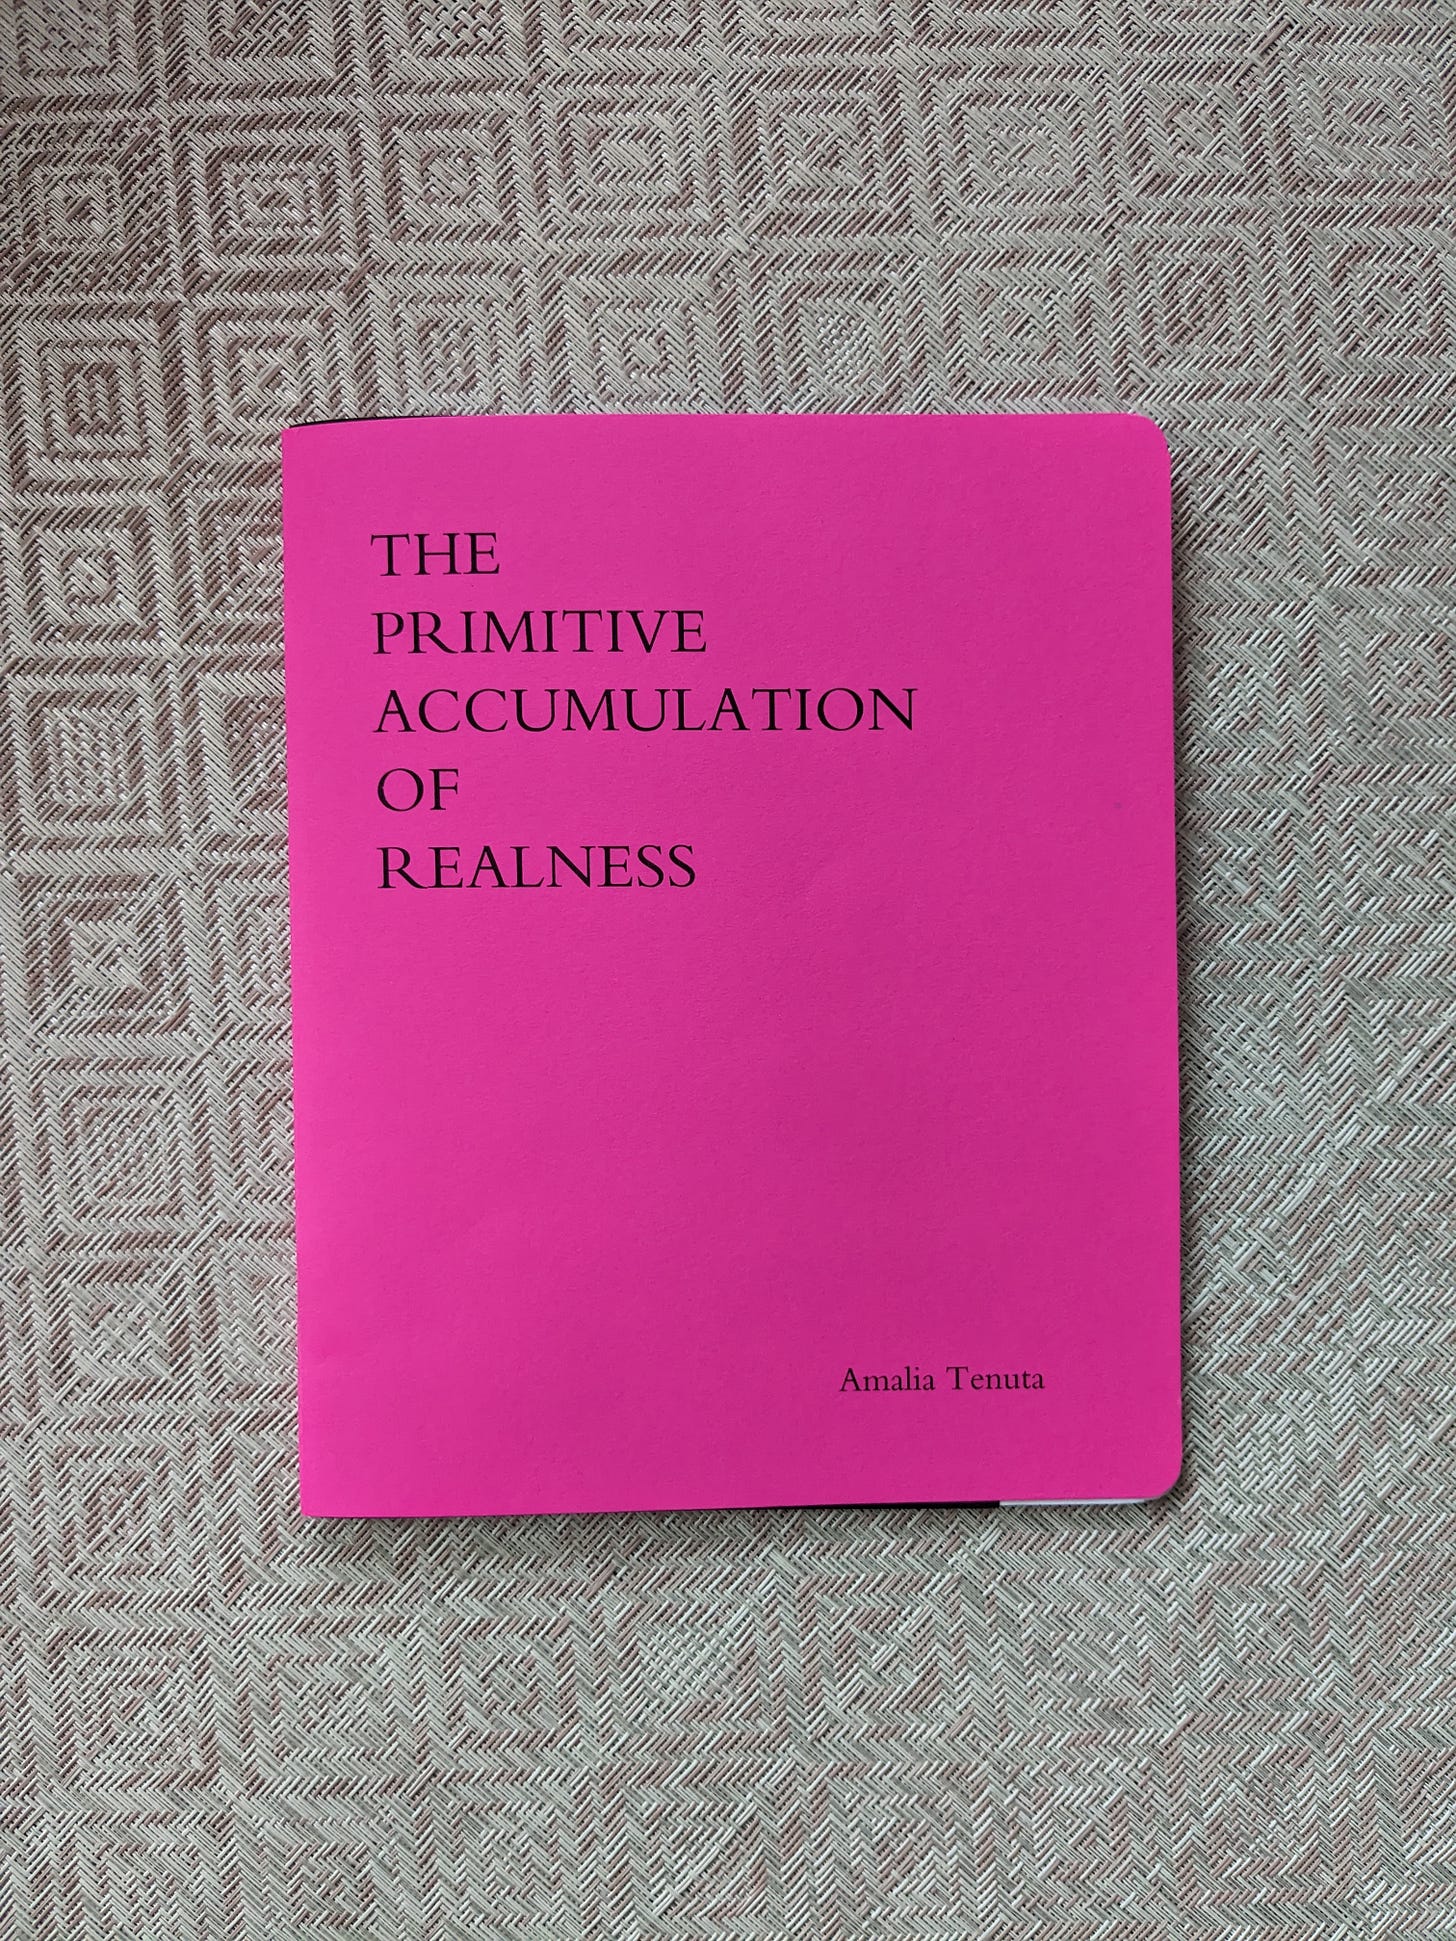 Photo of neon pink book on a pale pink mat.